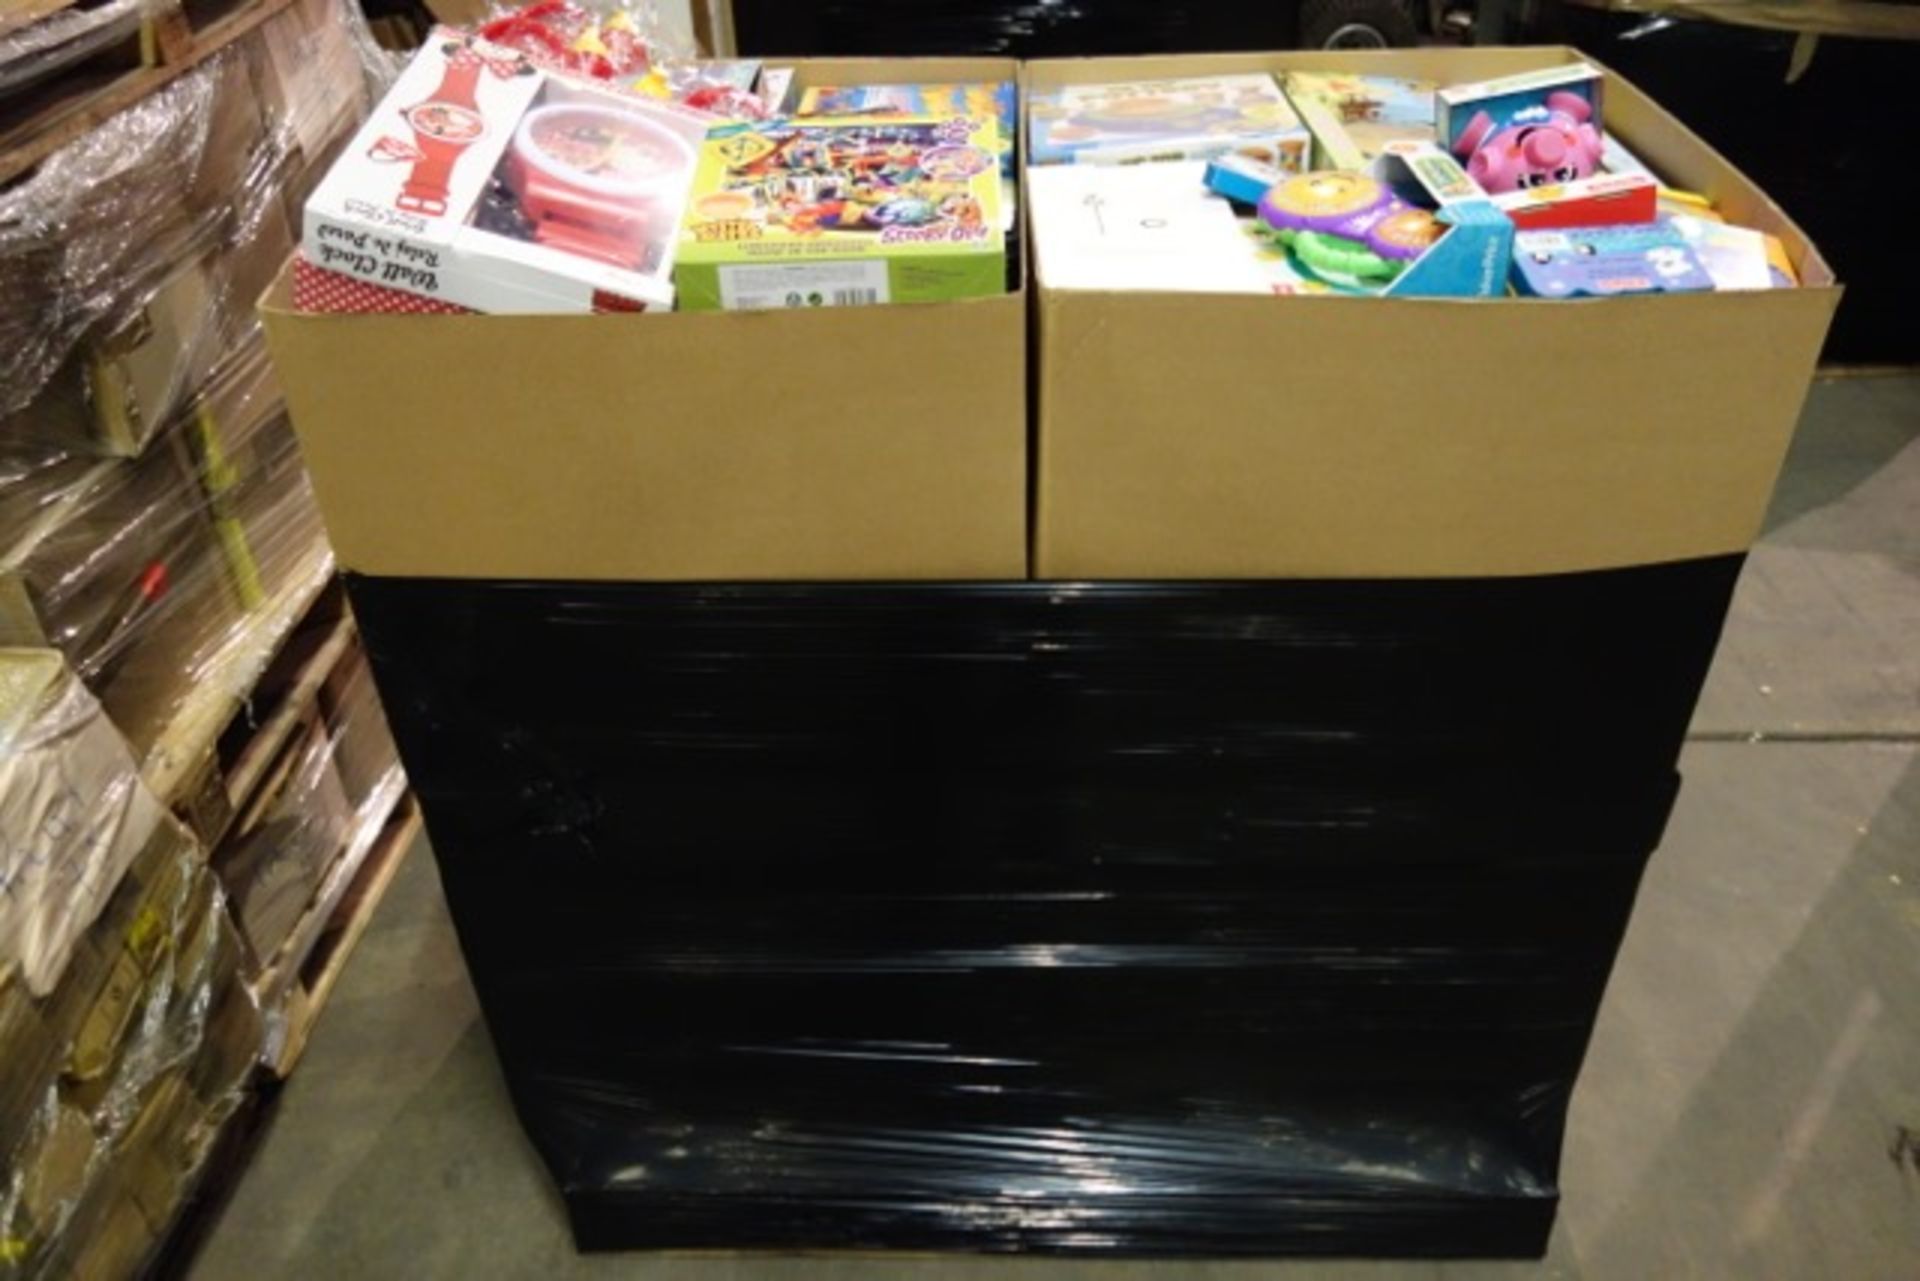 PALLET (19) Approx. 4 foot high to contain approx. 905 items of BRAND NEW Supermarket Surplus/End Of